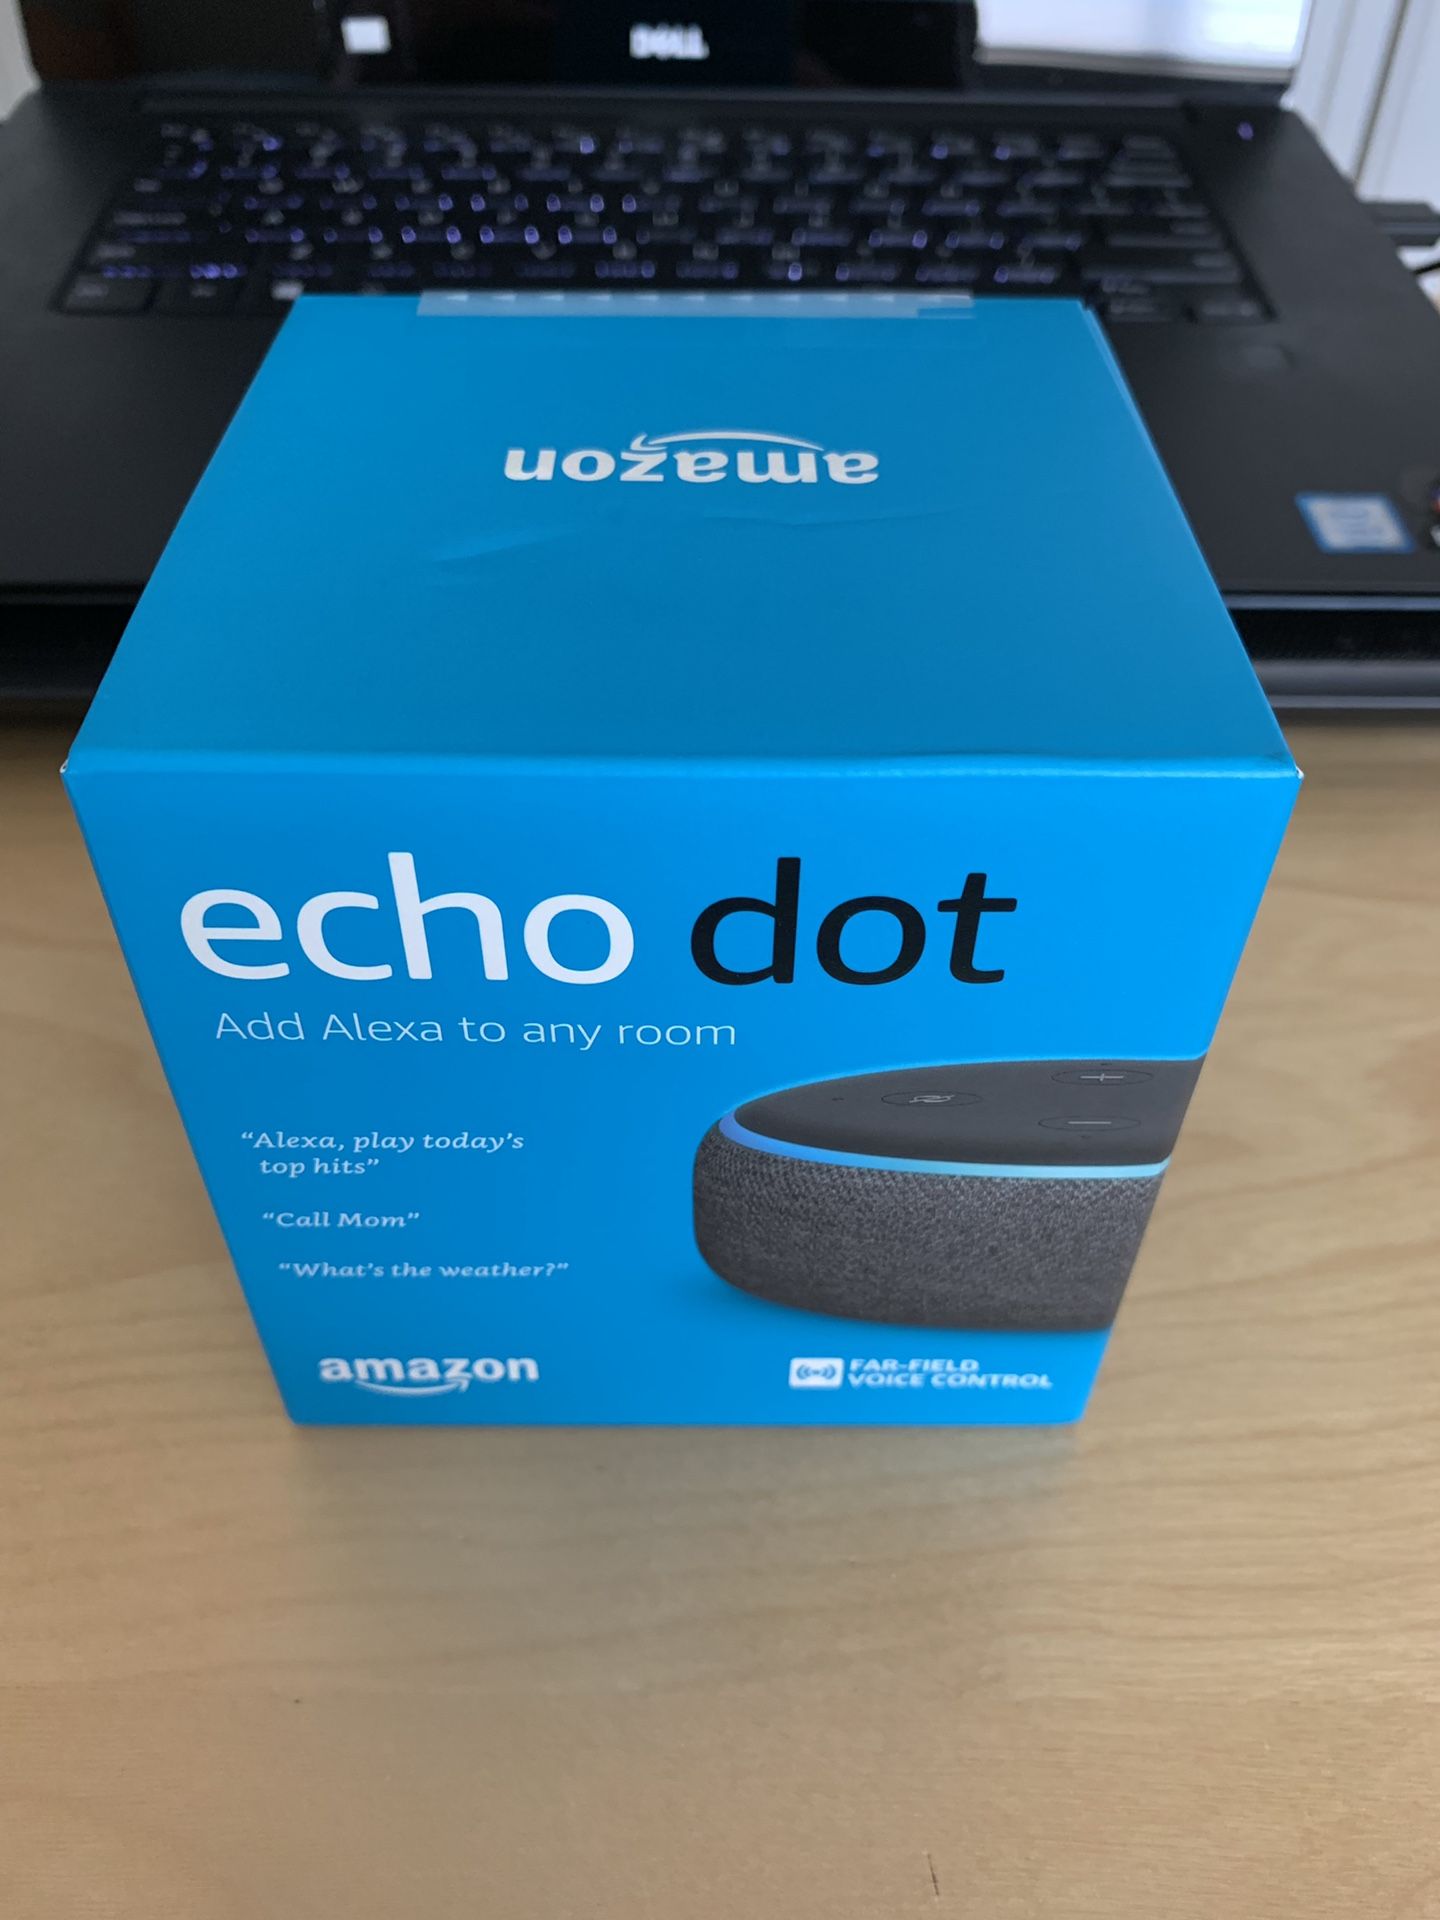 Echo Dot (3rd Gen) - Smart speaker with Alexa - Charcoal BRAND NEW/FACTORY SEALED $25 or best offer